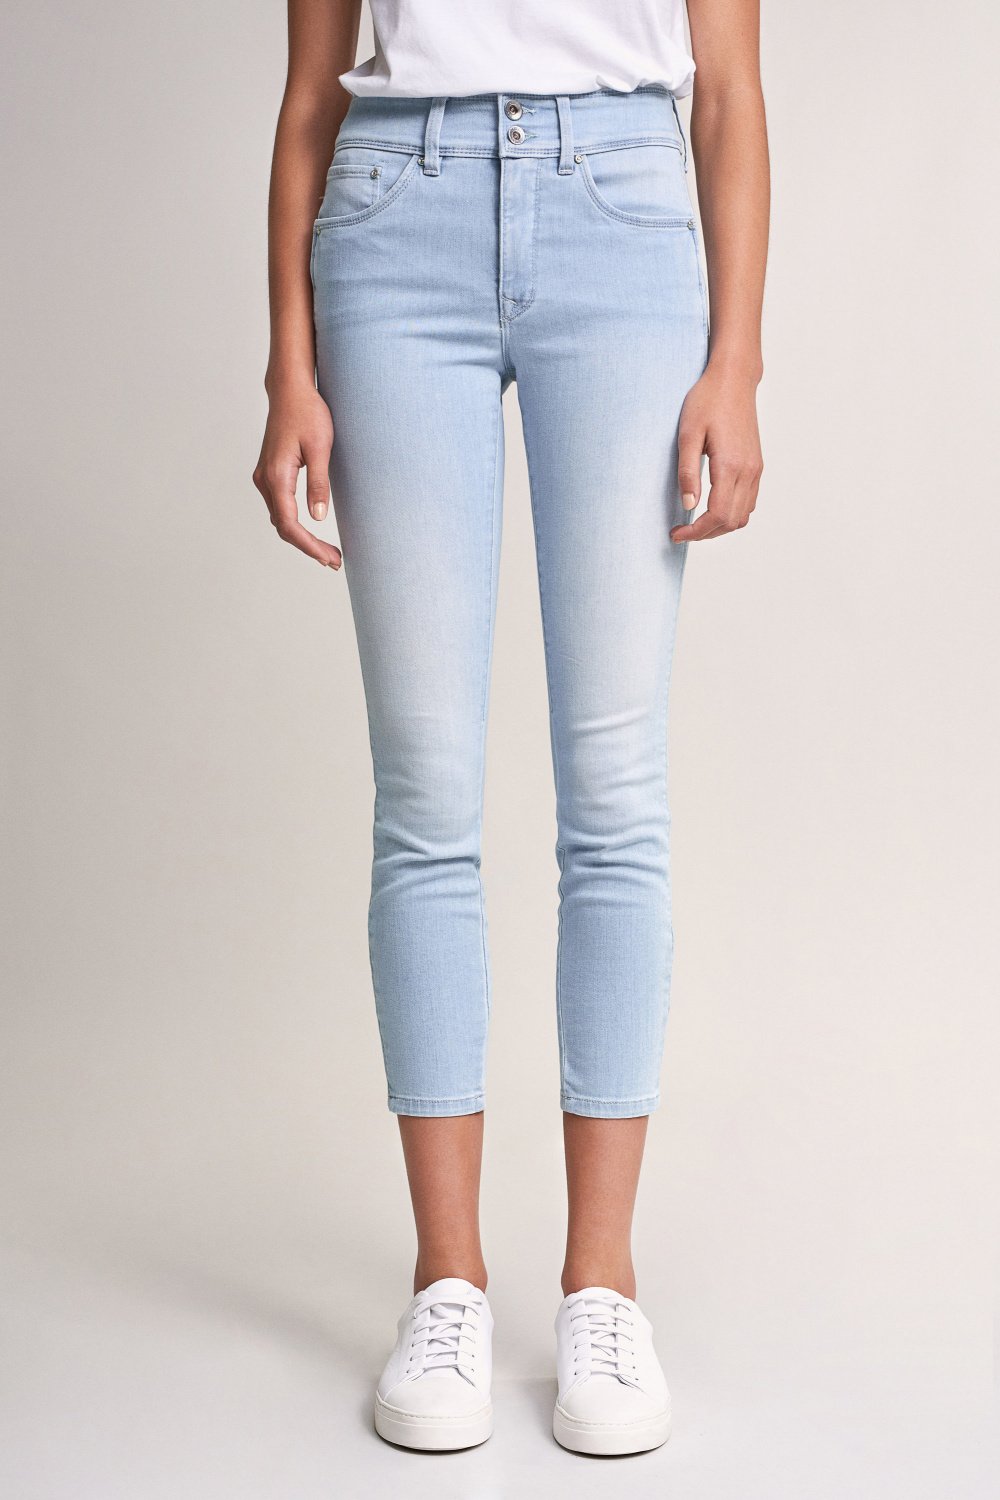 Push In Secret cropped jeans with wave detail - Salsa